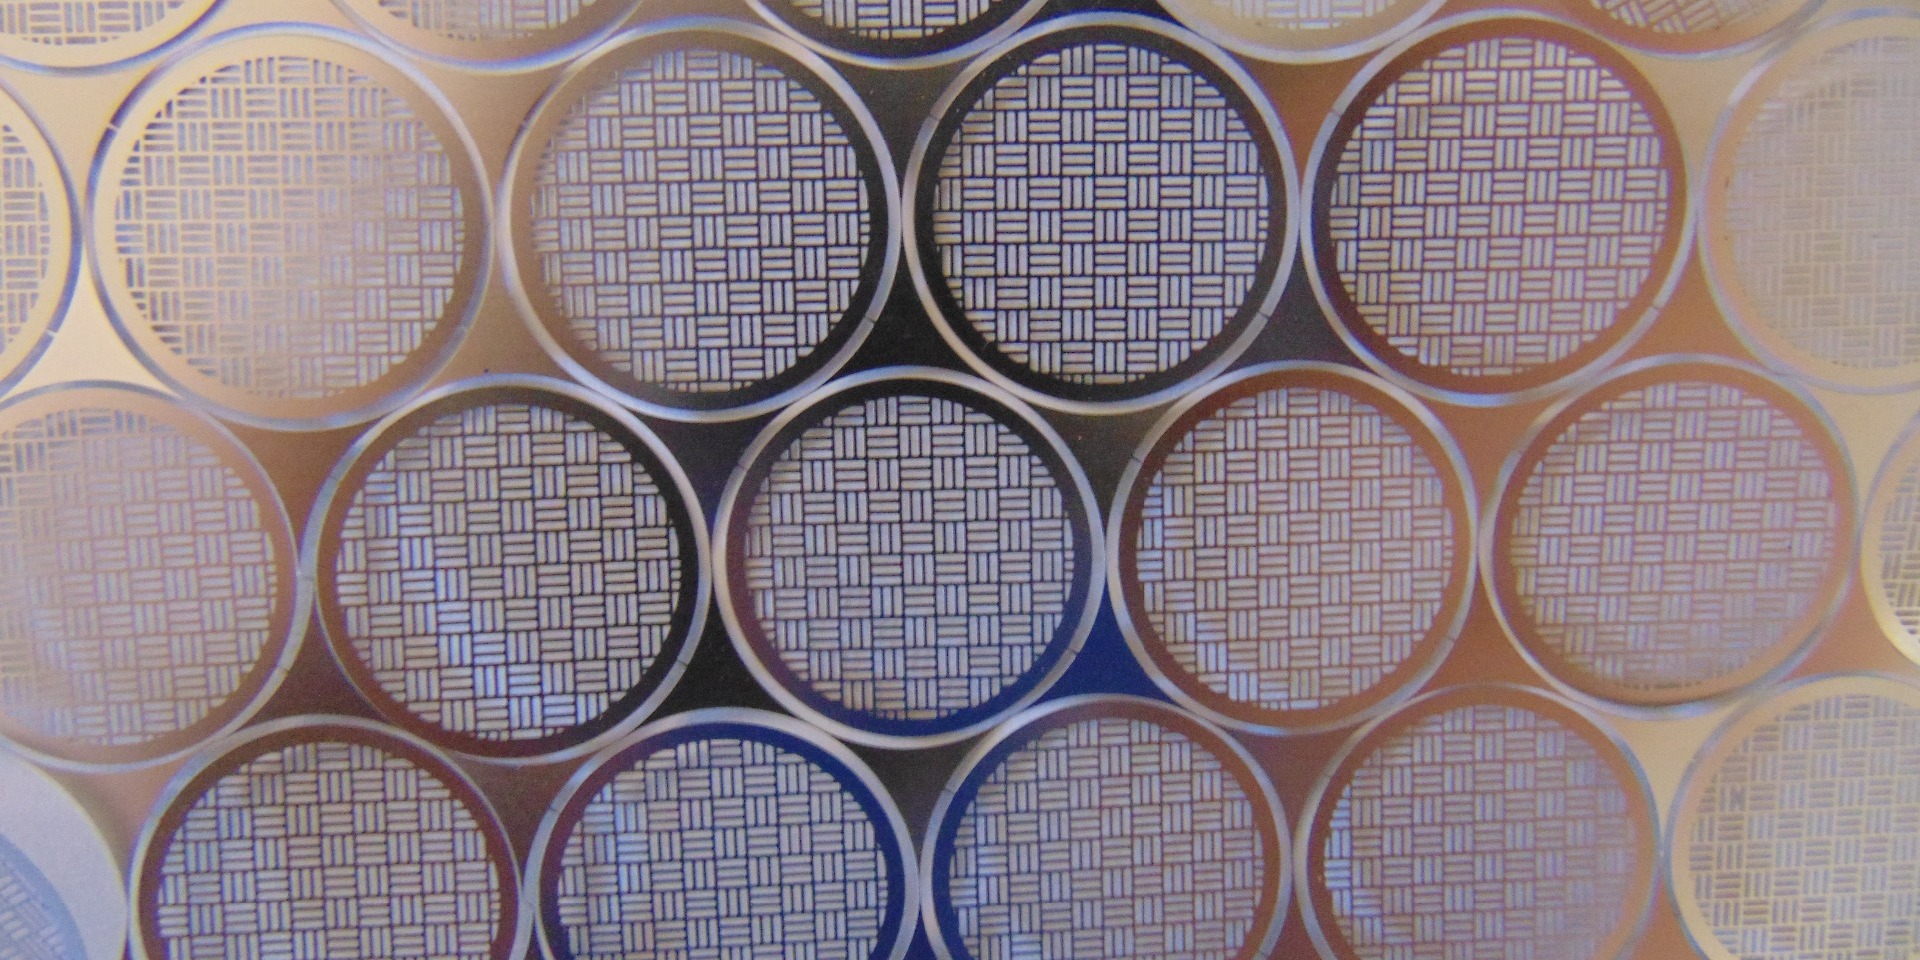 Etch Tech Manufacture High-Quality, Durable, Precision Meshes and Filters using the photo chemical etching process